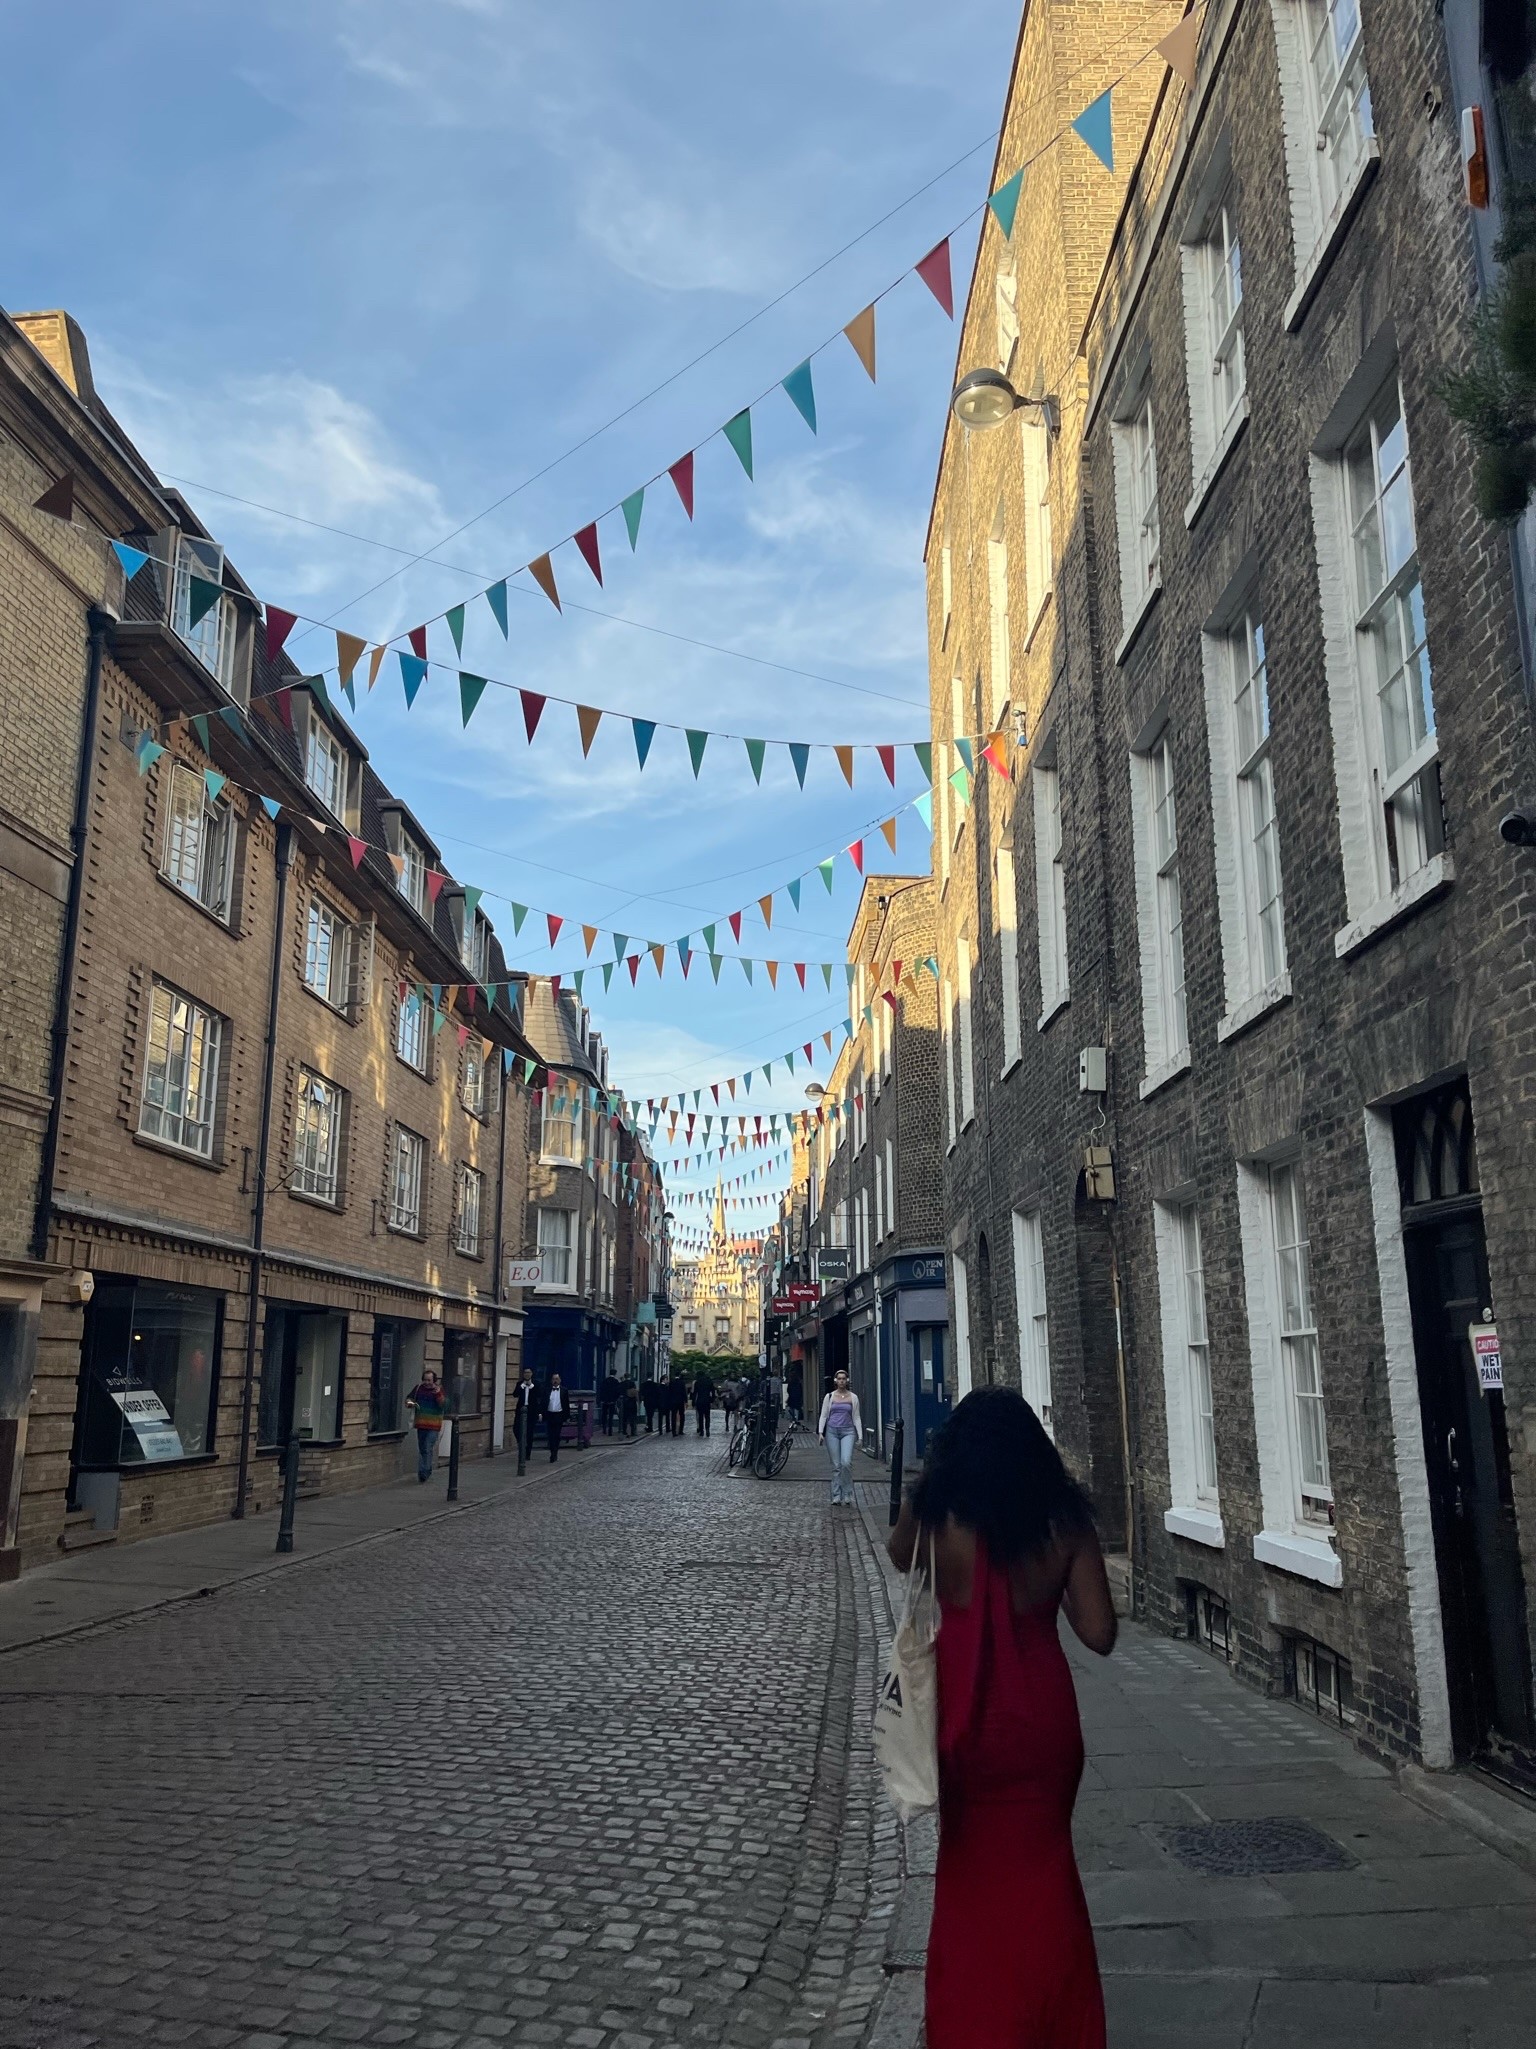 Eri in a formal dress, walking through a street with bunting going accross the buildings